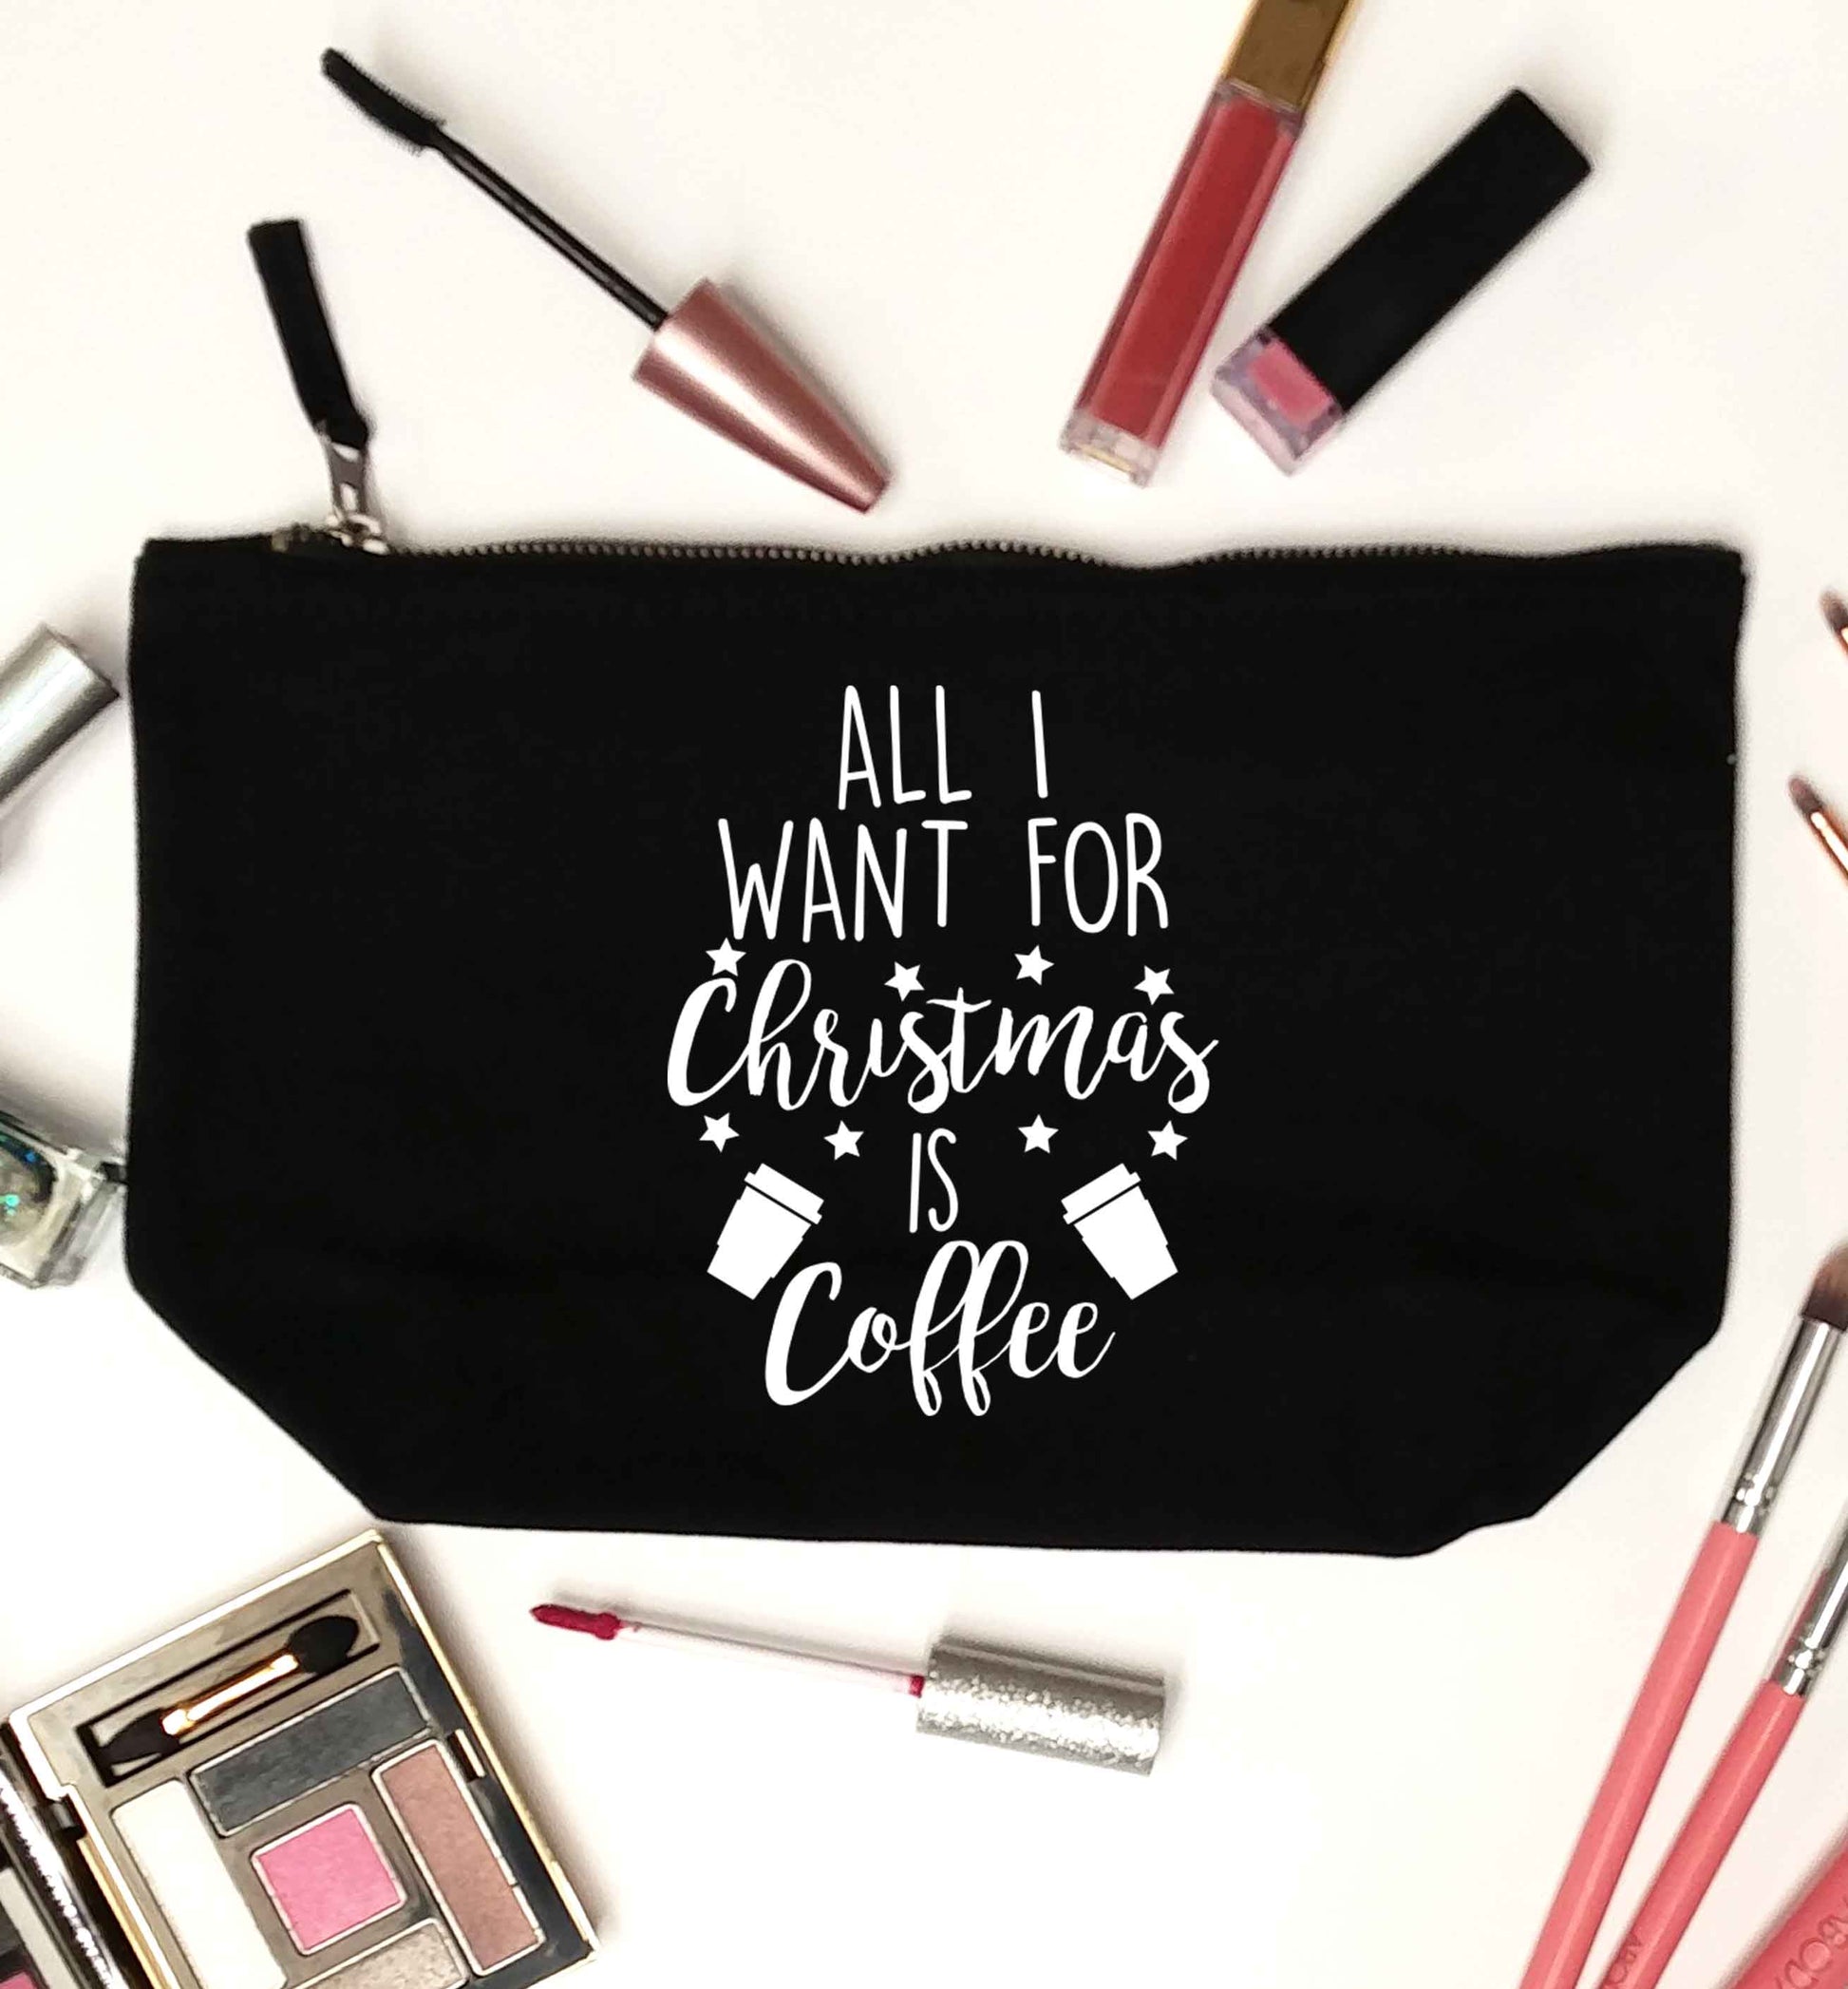 All I want for Christmas is coffee black makeup bag